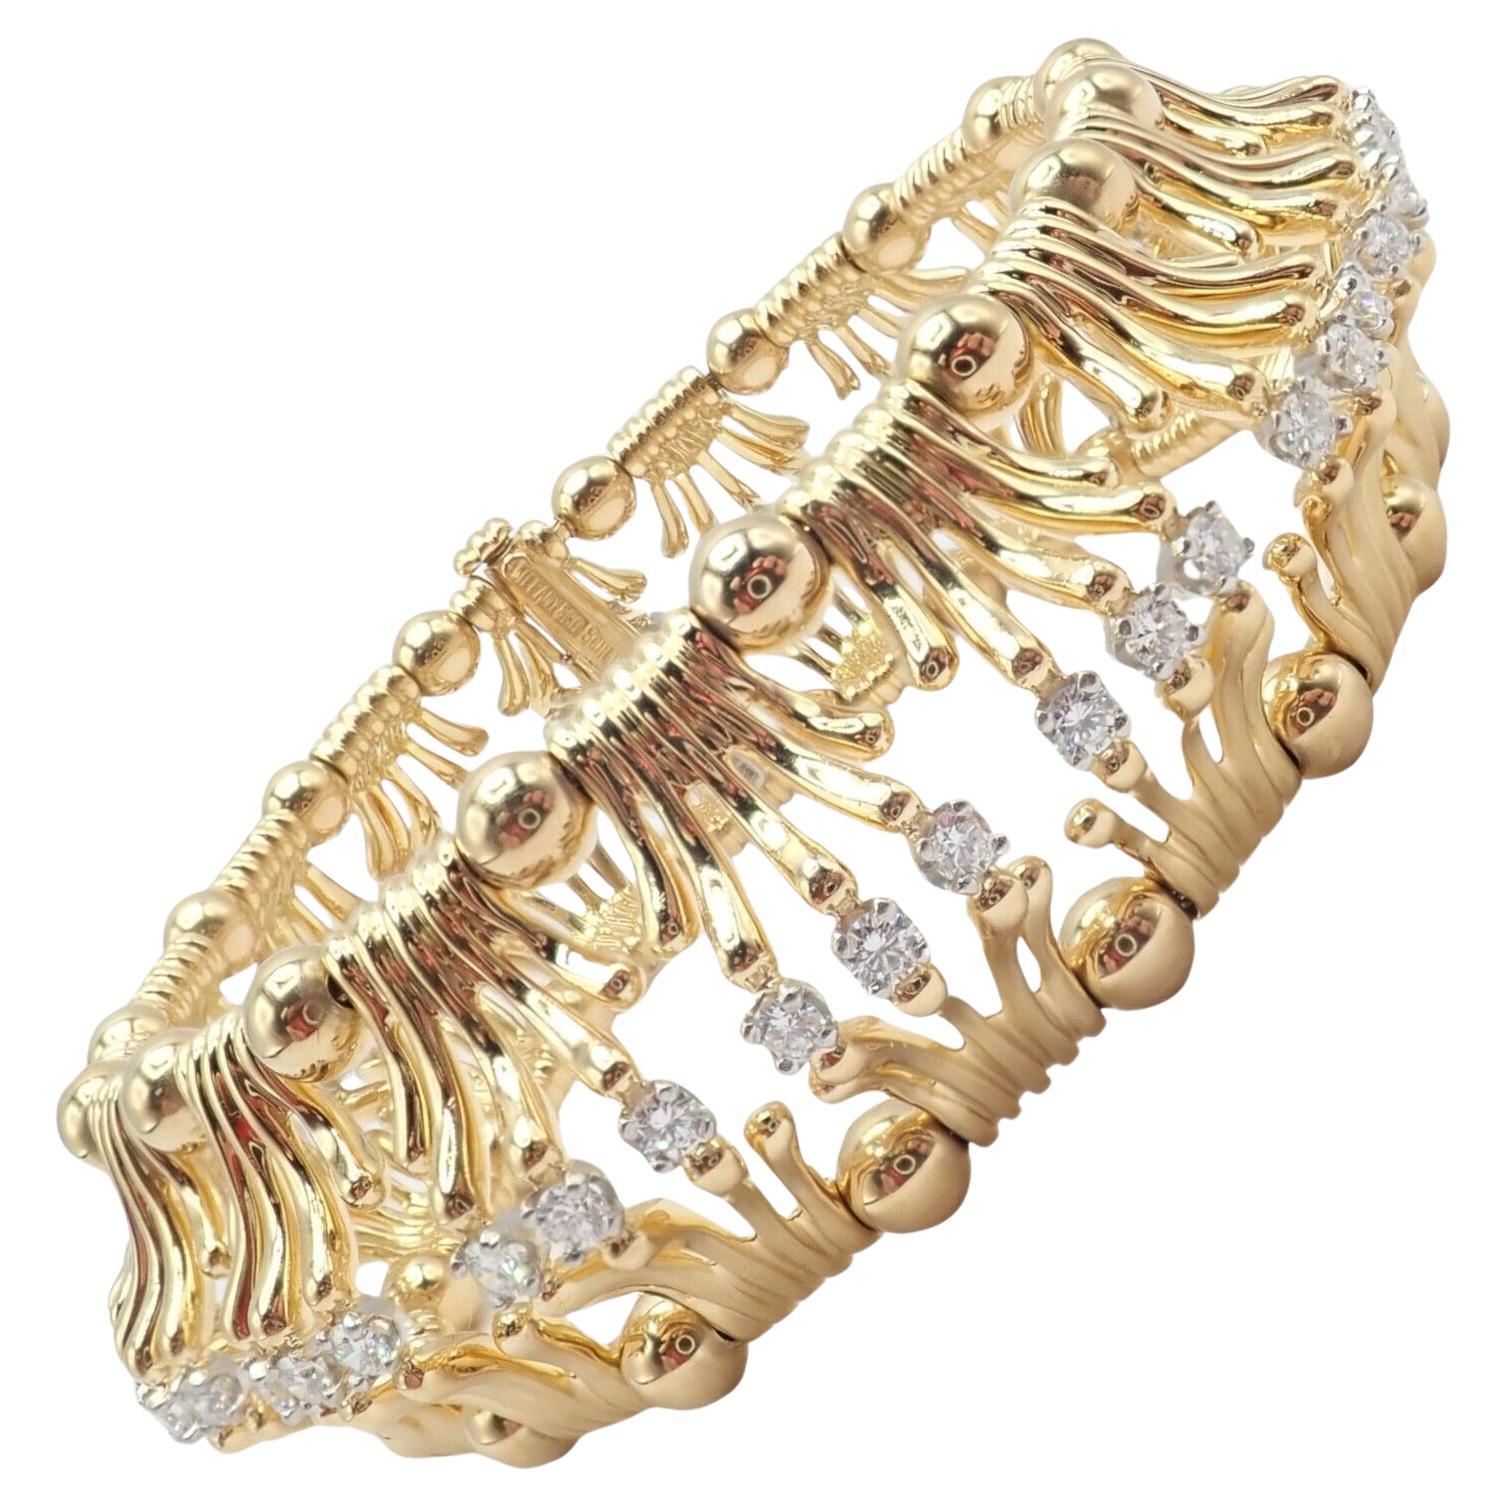 Tiffany & Co Jean Schlumberger Diamond Yellow Gold And Platinum Hands Bracelet For Sale